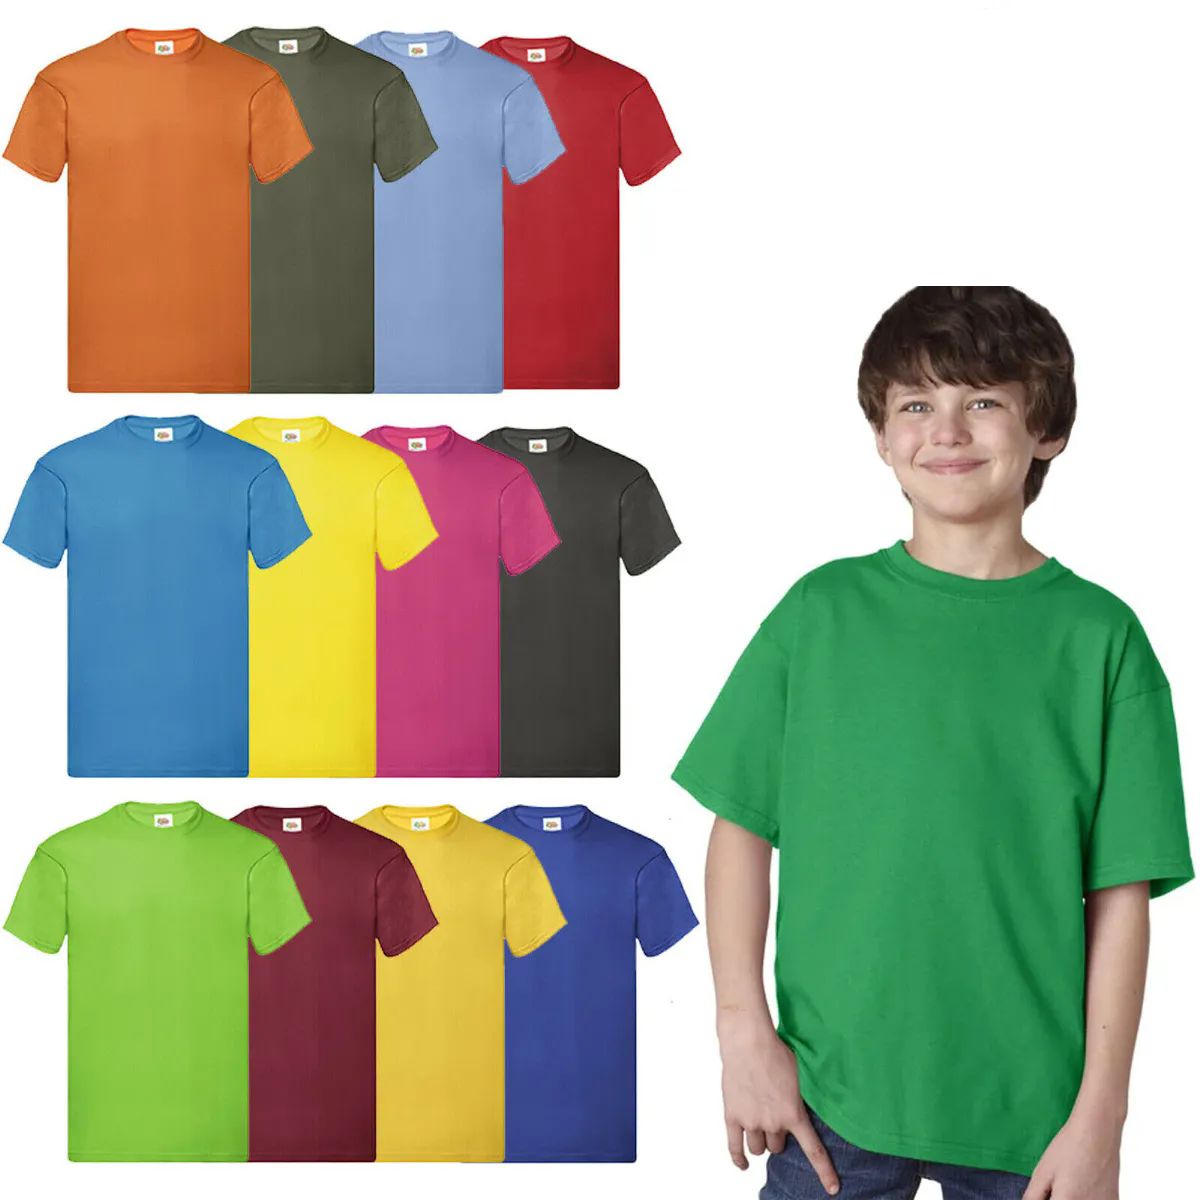 24 Pieces of Billionhats Kids Youth Cotton Assorted Colors T-Shirts Size Xsmall